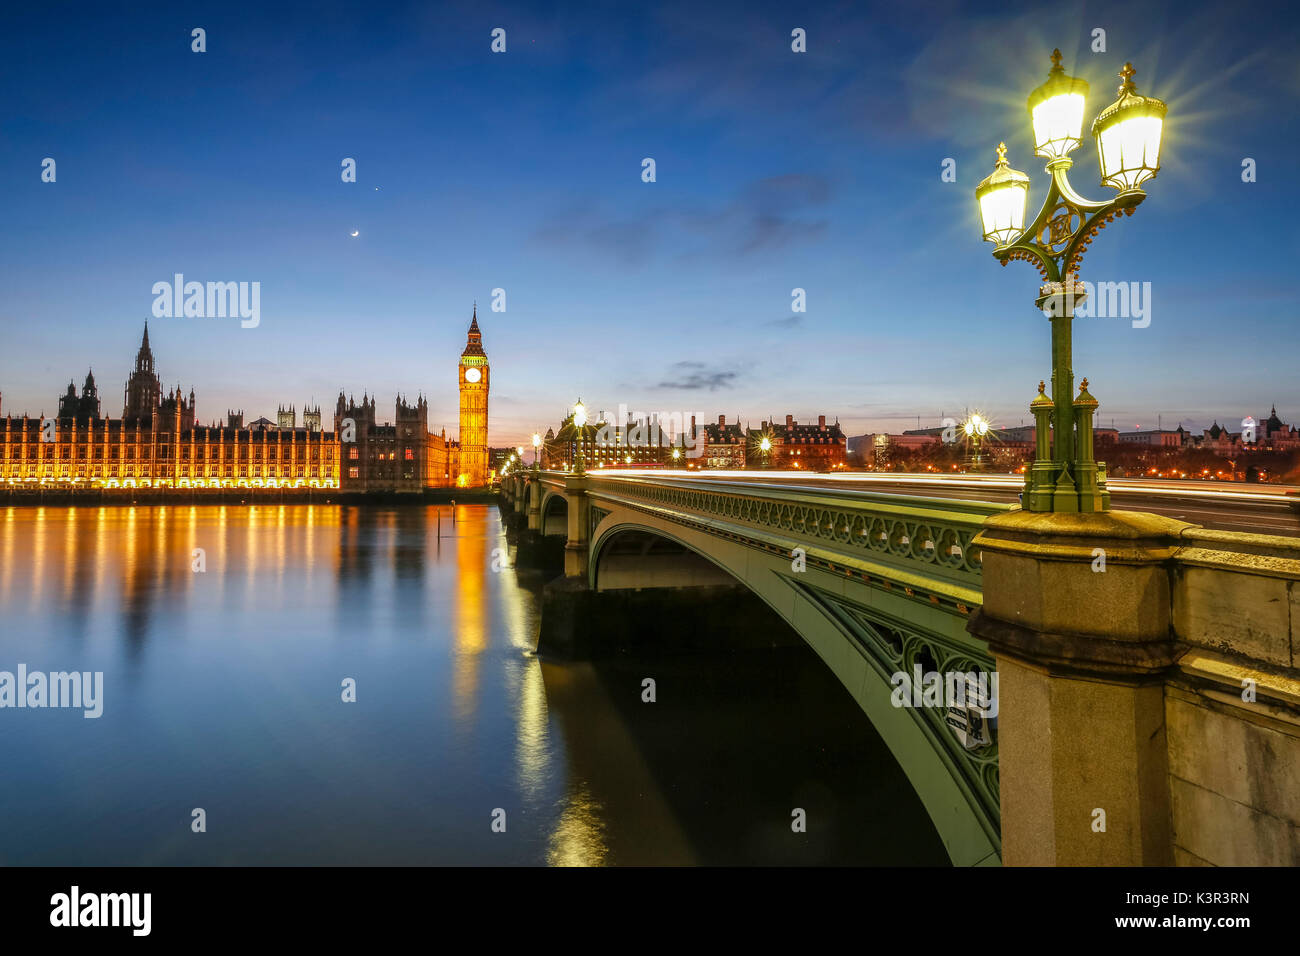 Night view of Palace of Westminster and Big Ben reflecting on Thames river. Stock Photo